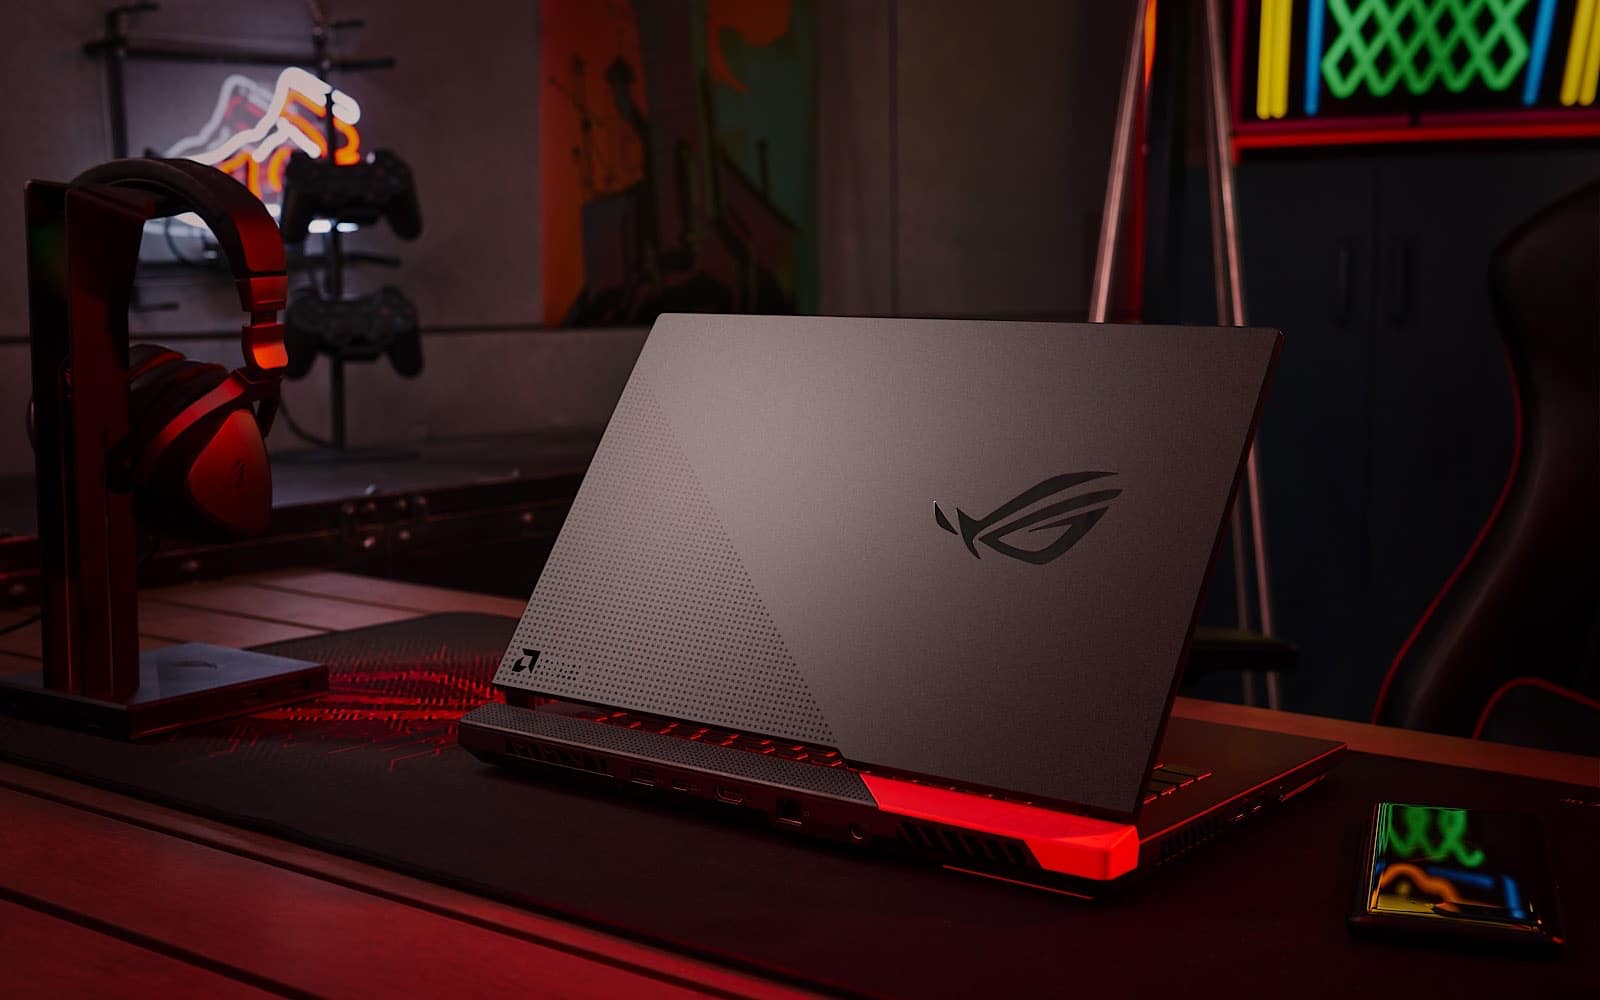 Asus's ROG Advantage Edition laptop with Radeon 6000 series graphics inside